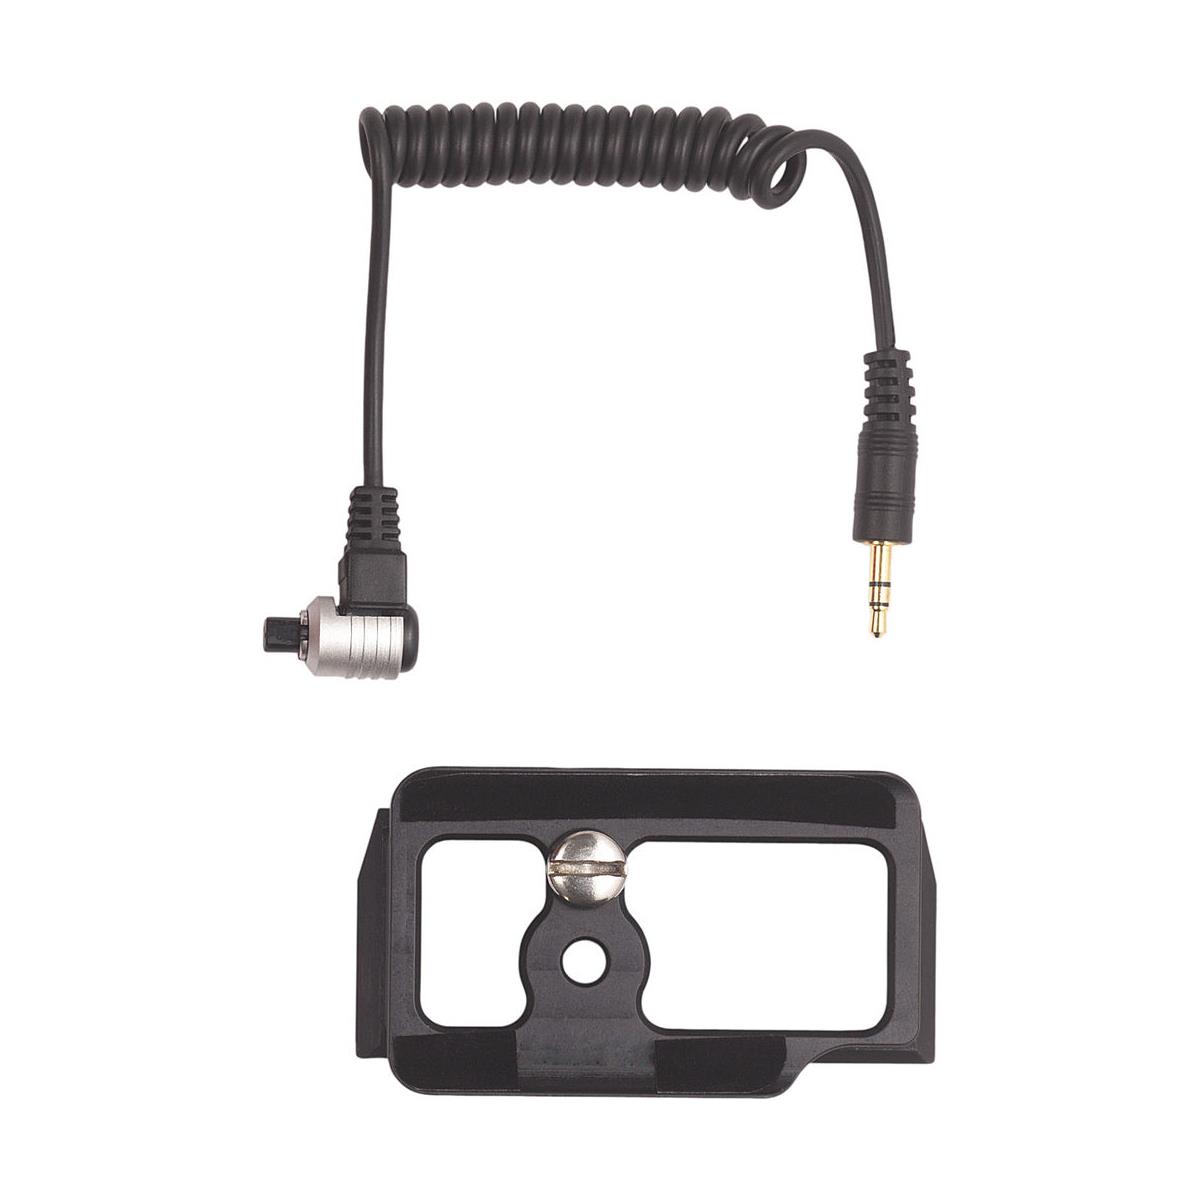 AquaTech Cable Release and Camera Plate Kit for Canon EOS R in Base Housing -  11137